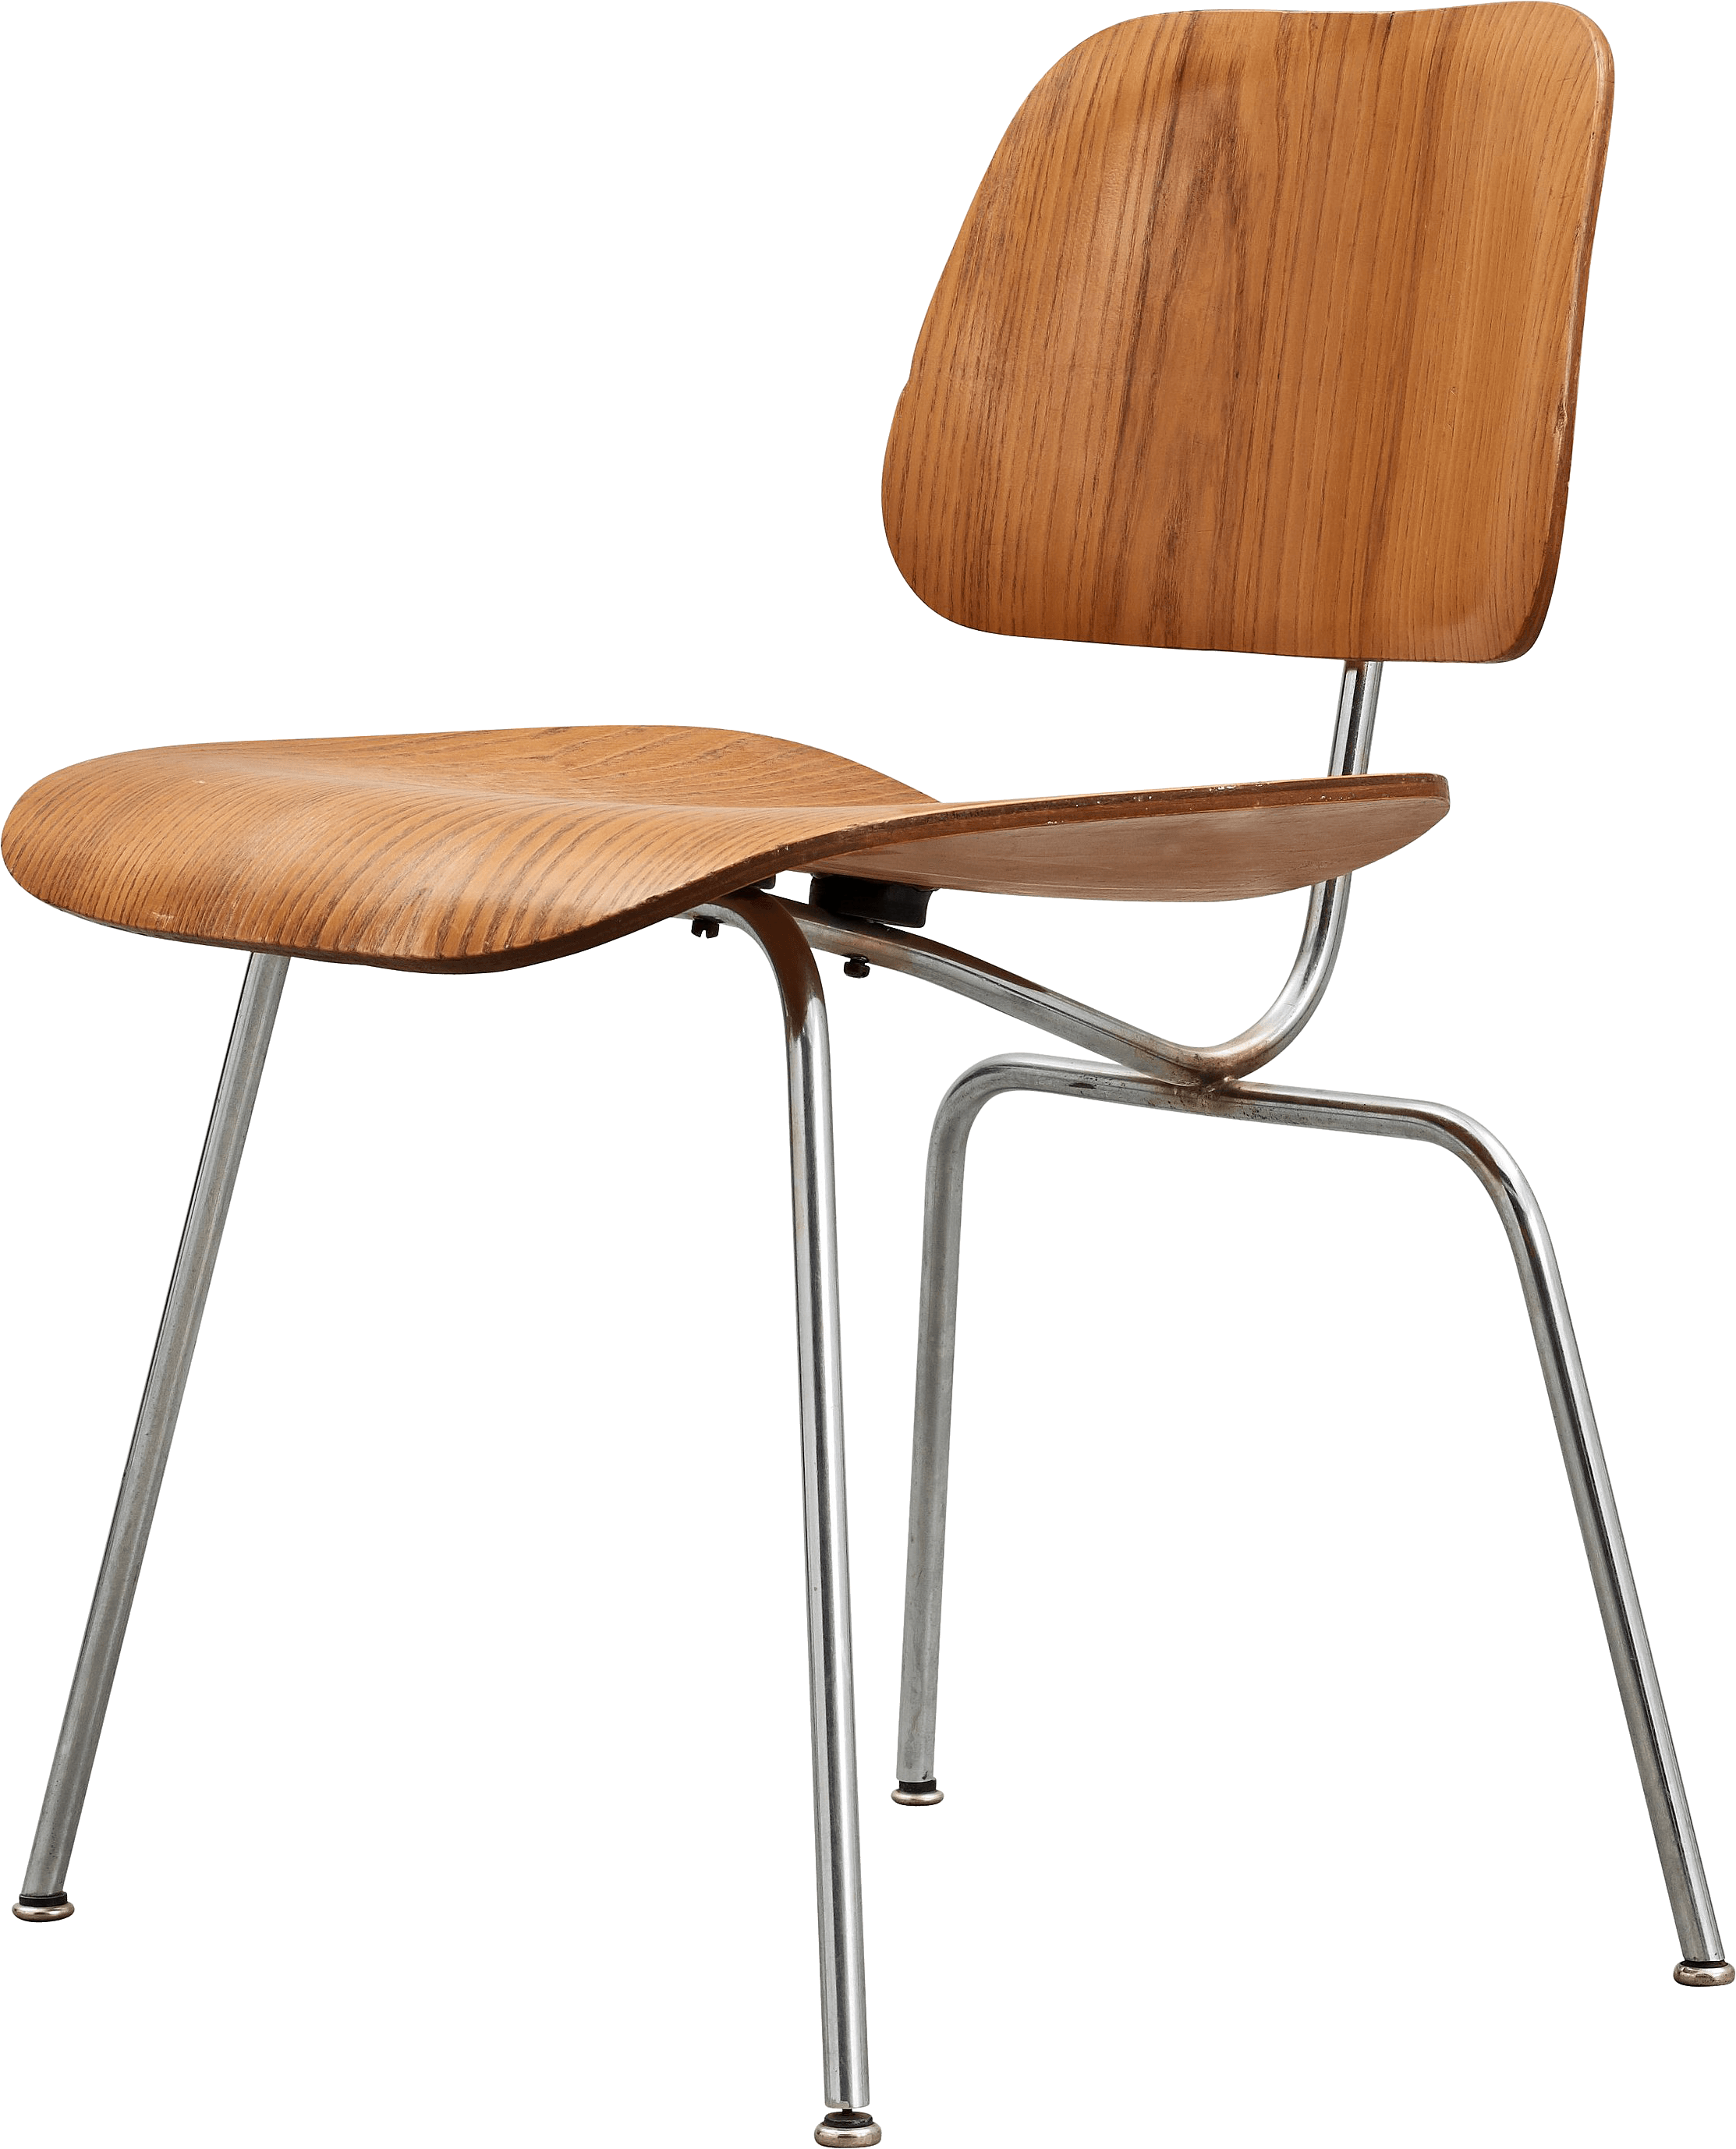 Chair Photos Free Download PNG HD PNG Image